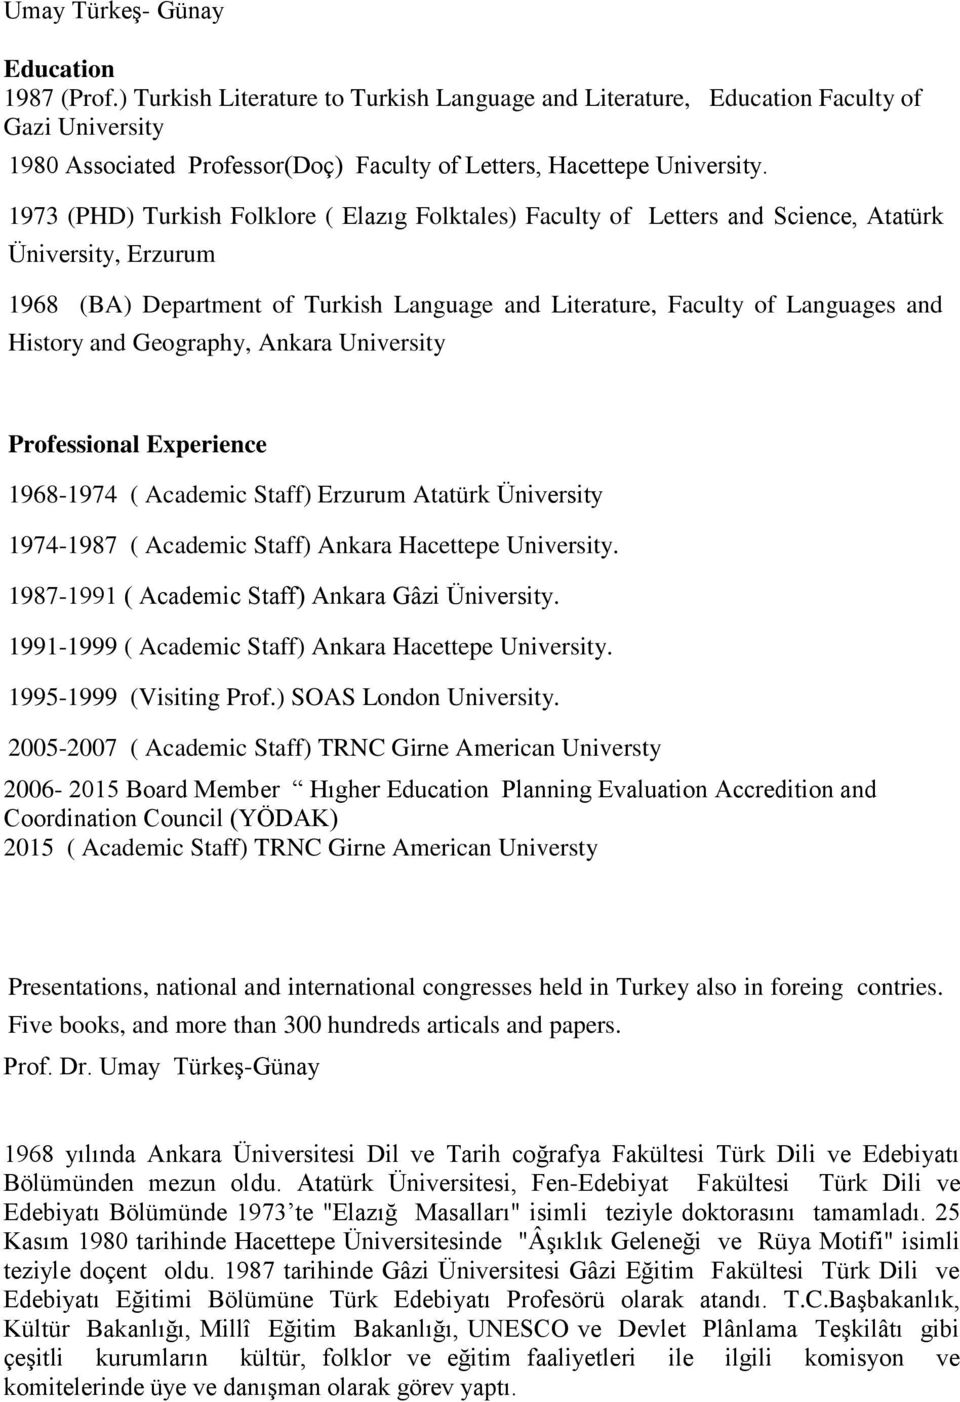 1973 (PHD) Turkish Folklore ( Elazıg Folktales) Faculty of Letters and Science, Atatürk Üniversity, Erzurum 1968 (BA) Department of Turkish Language and Literature, Faculty of Languages and History